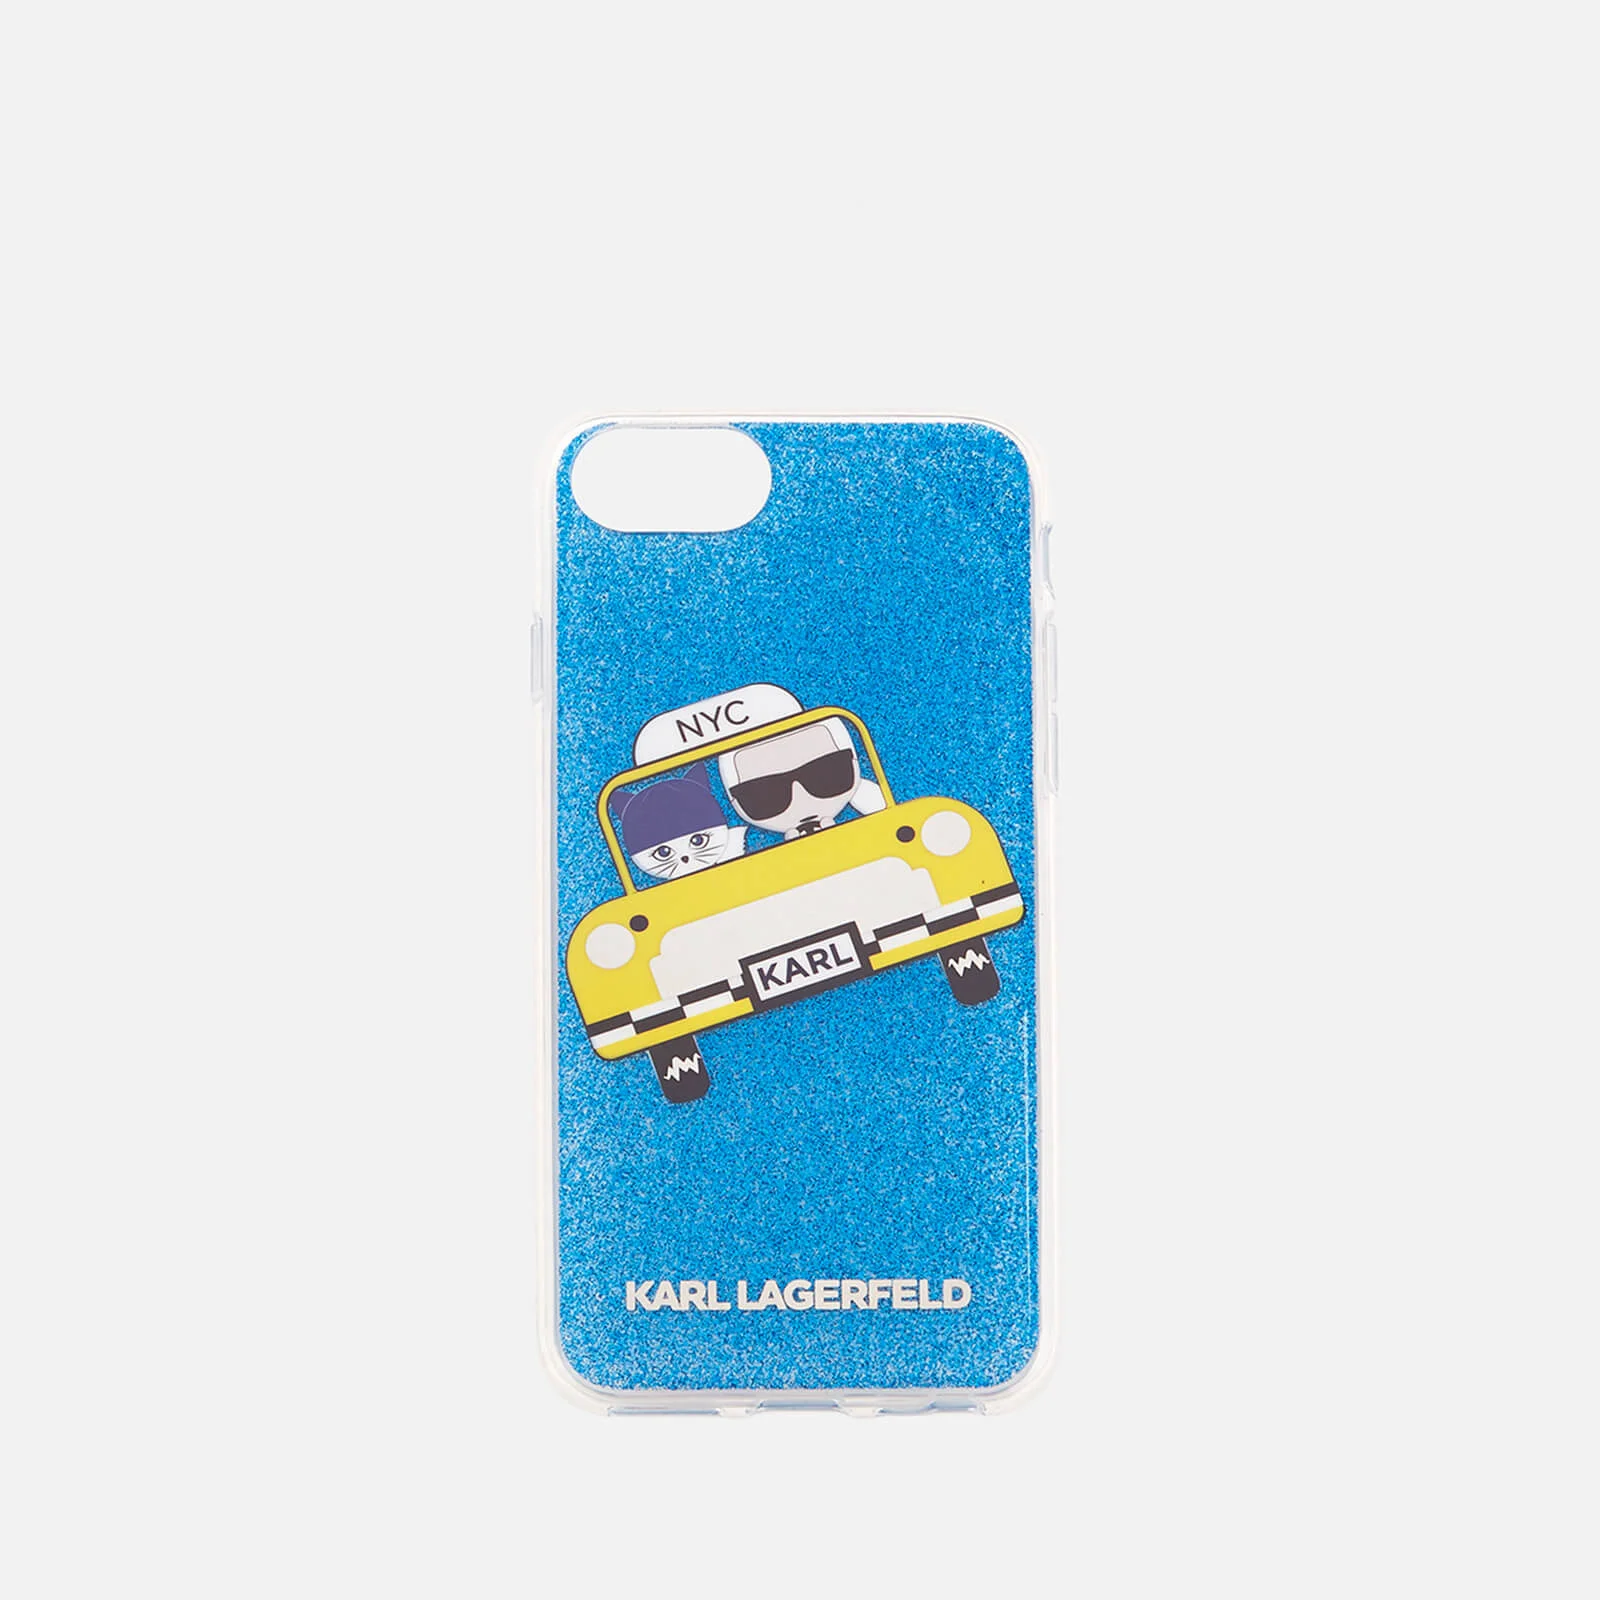 Karl Lagerfeld Women's NYC Taxi Phone Case - Navy Image 1